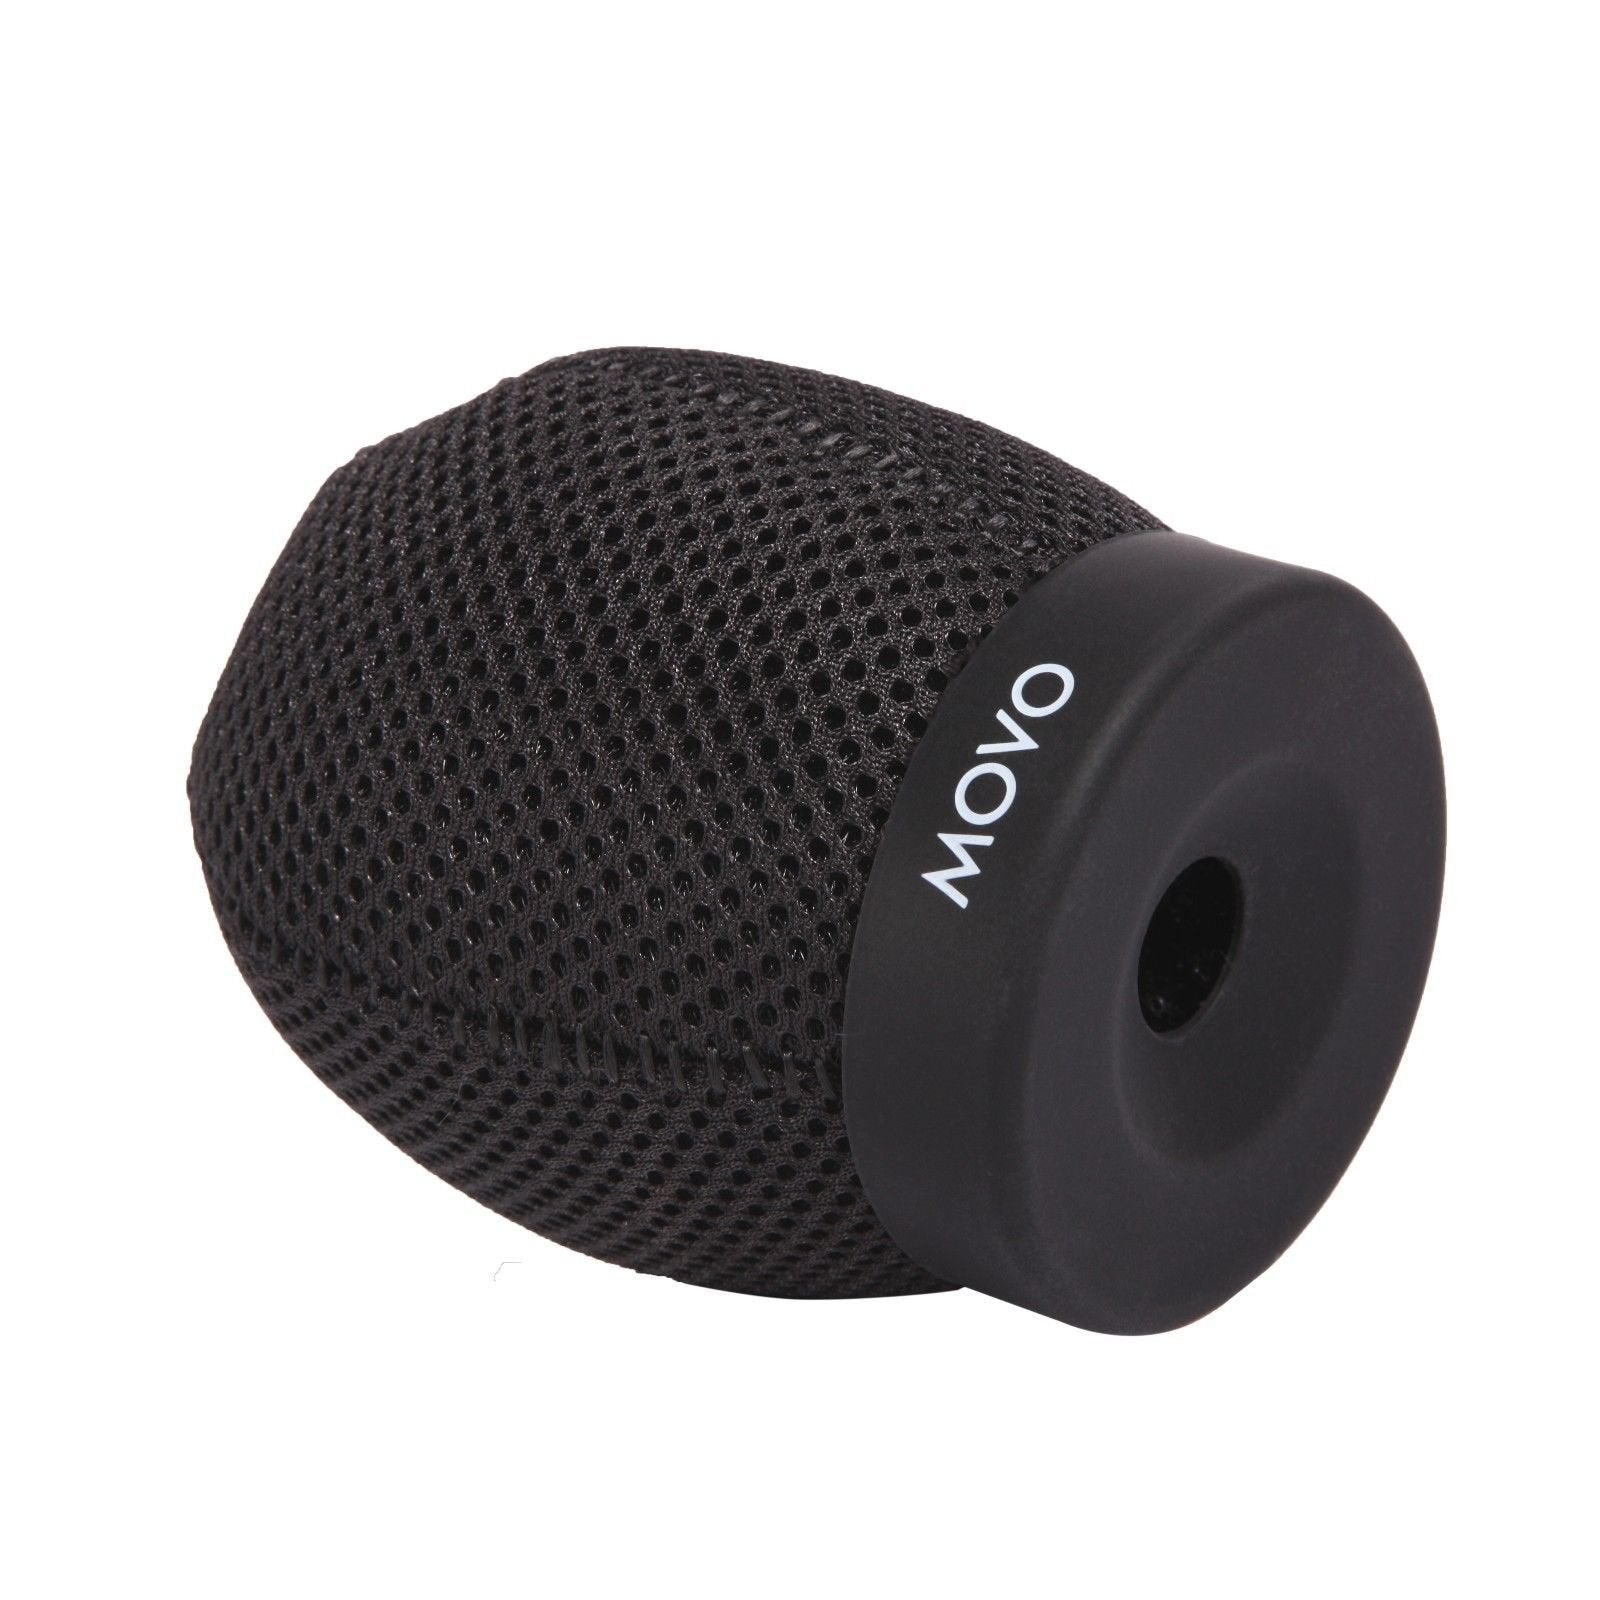 Movo WST220 Professional Premium Quality Ballistic Nylon Windscreen with Acoustic Foam Technology for Shotgun Microphones up to 20cm Long (Fits R�de NTG-3)  - Like New